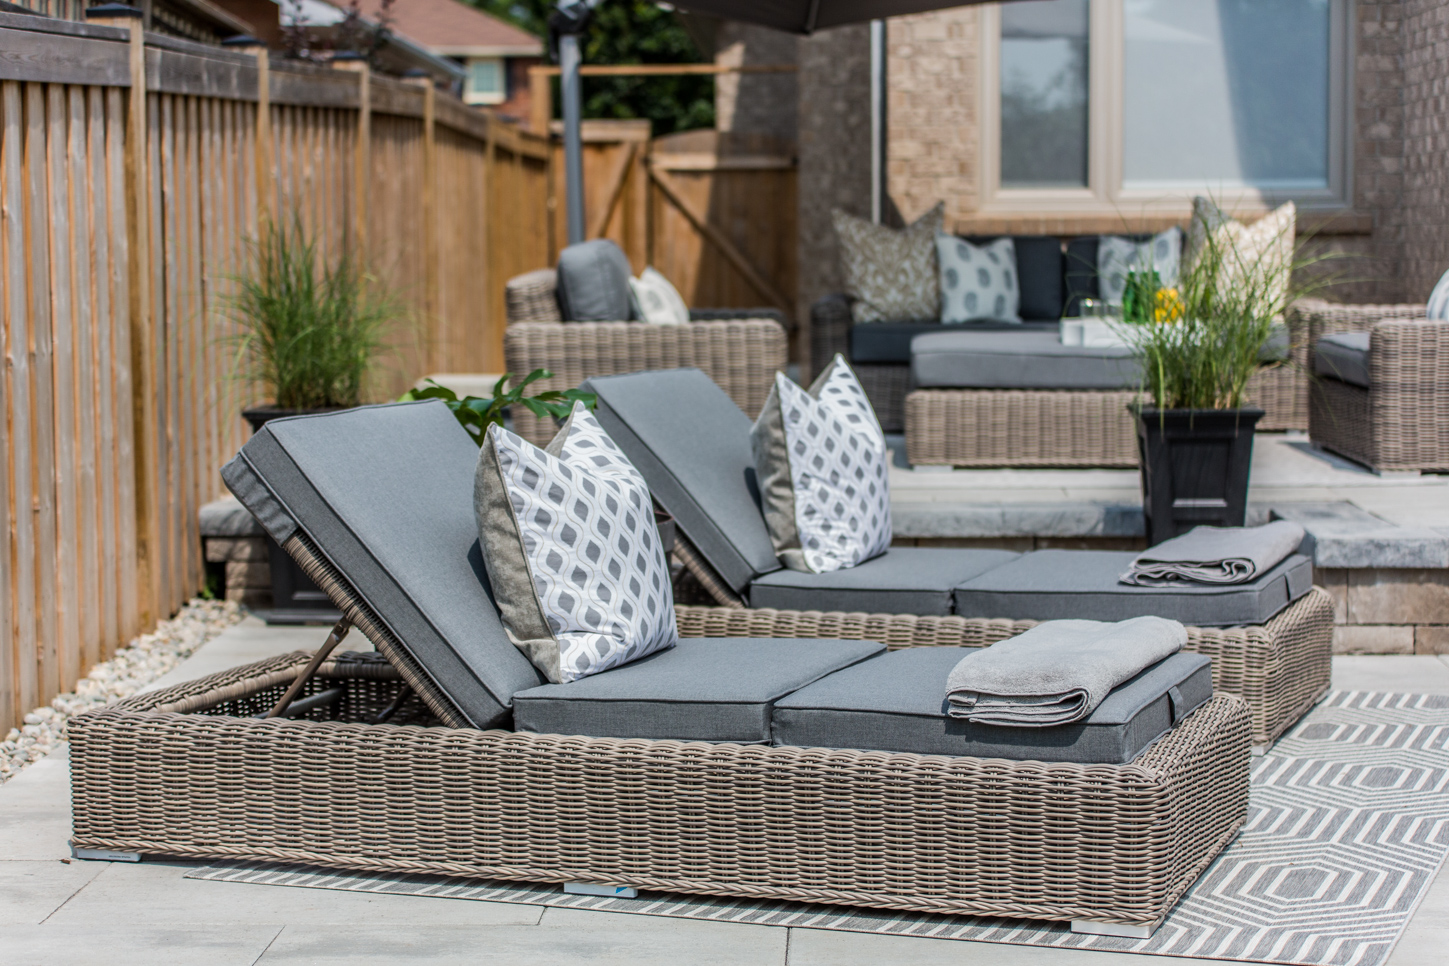 Wicker lounge beds with decorative grey cushions